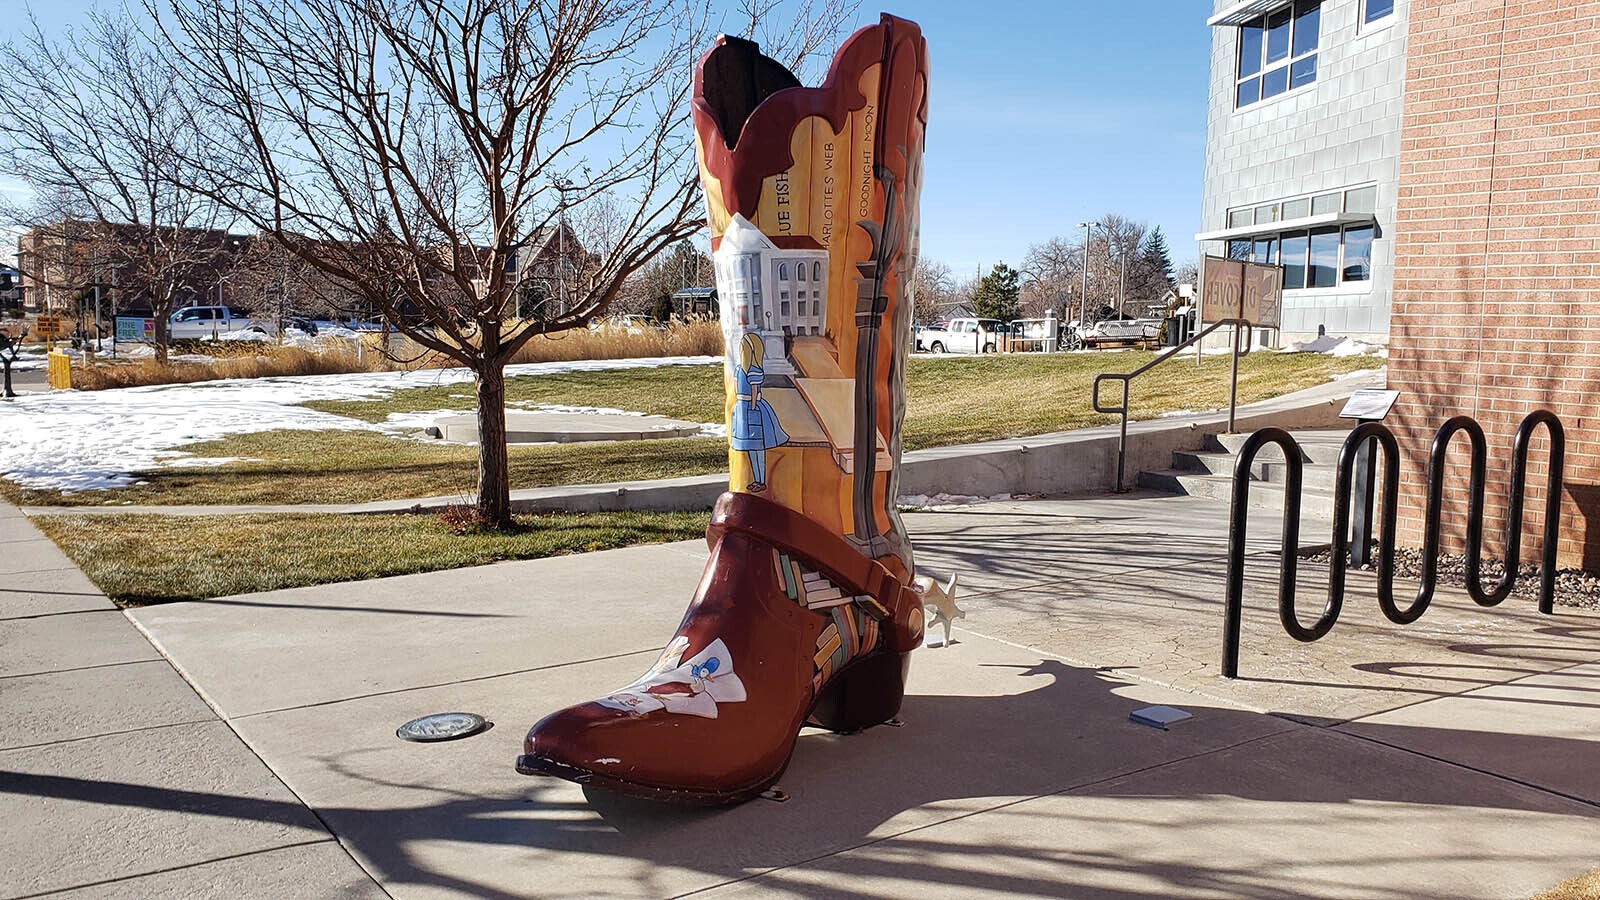 The "Alice in Wonderland" Big Boot at Laramie County Library is among the 18 boots that are part of an audio Big Boot walking trail in Cheyenne. There are more than 30 overall.